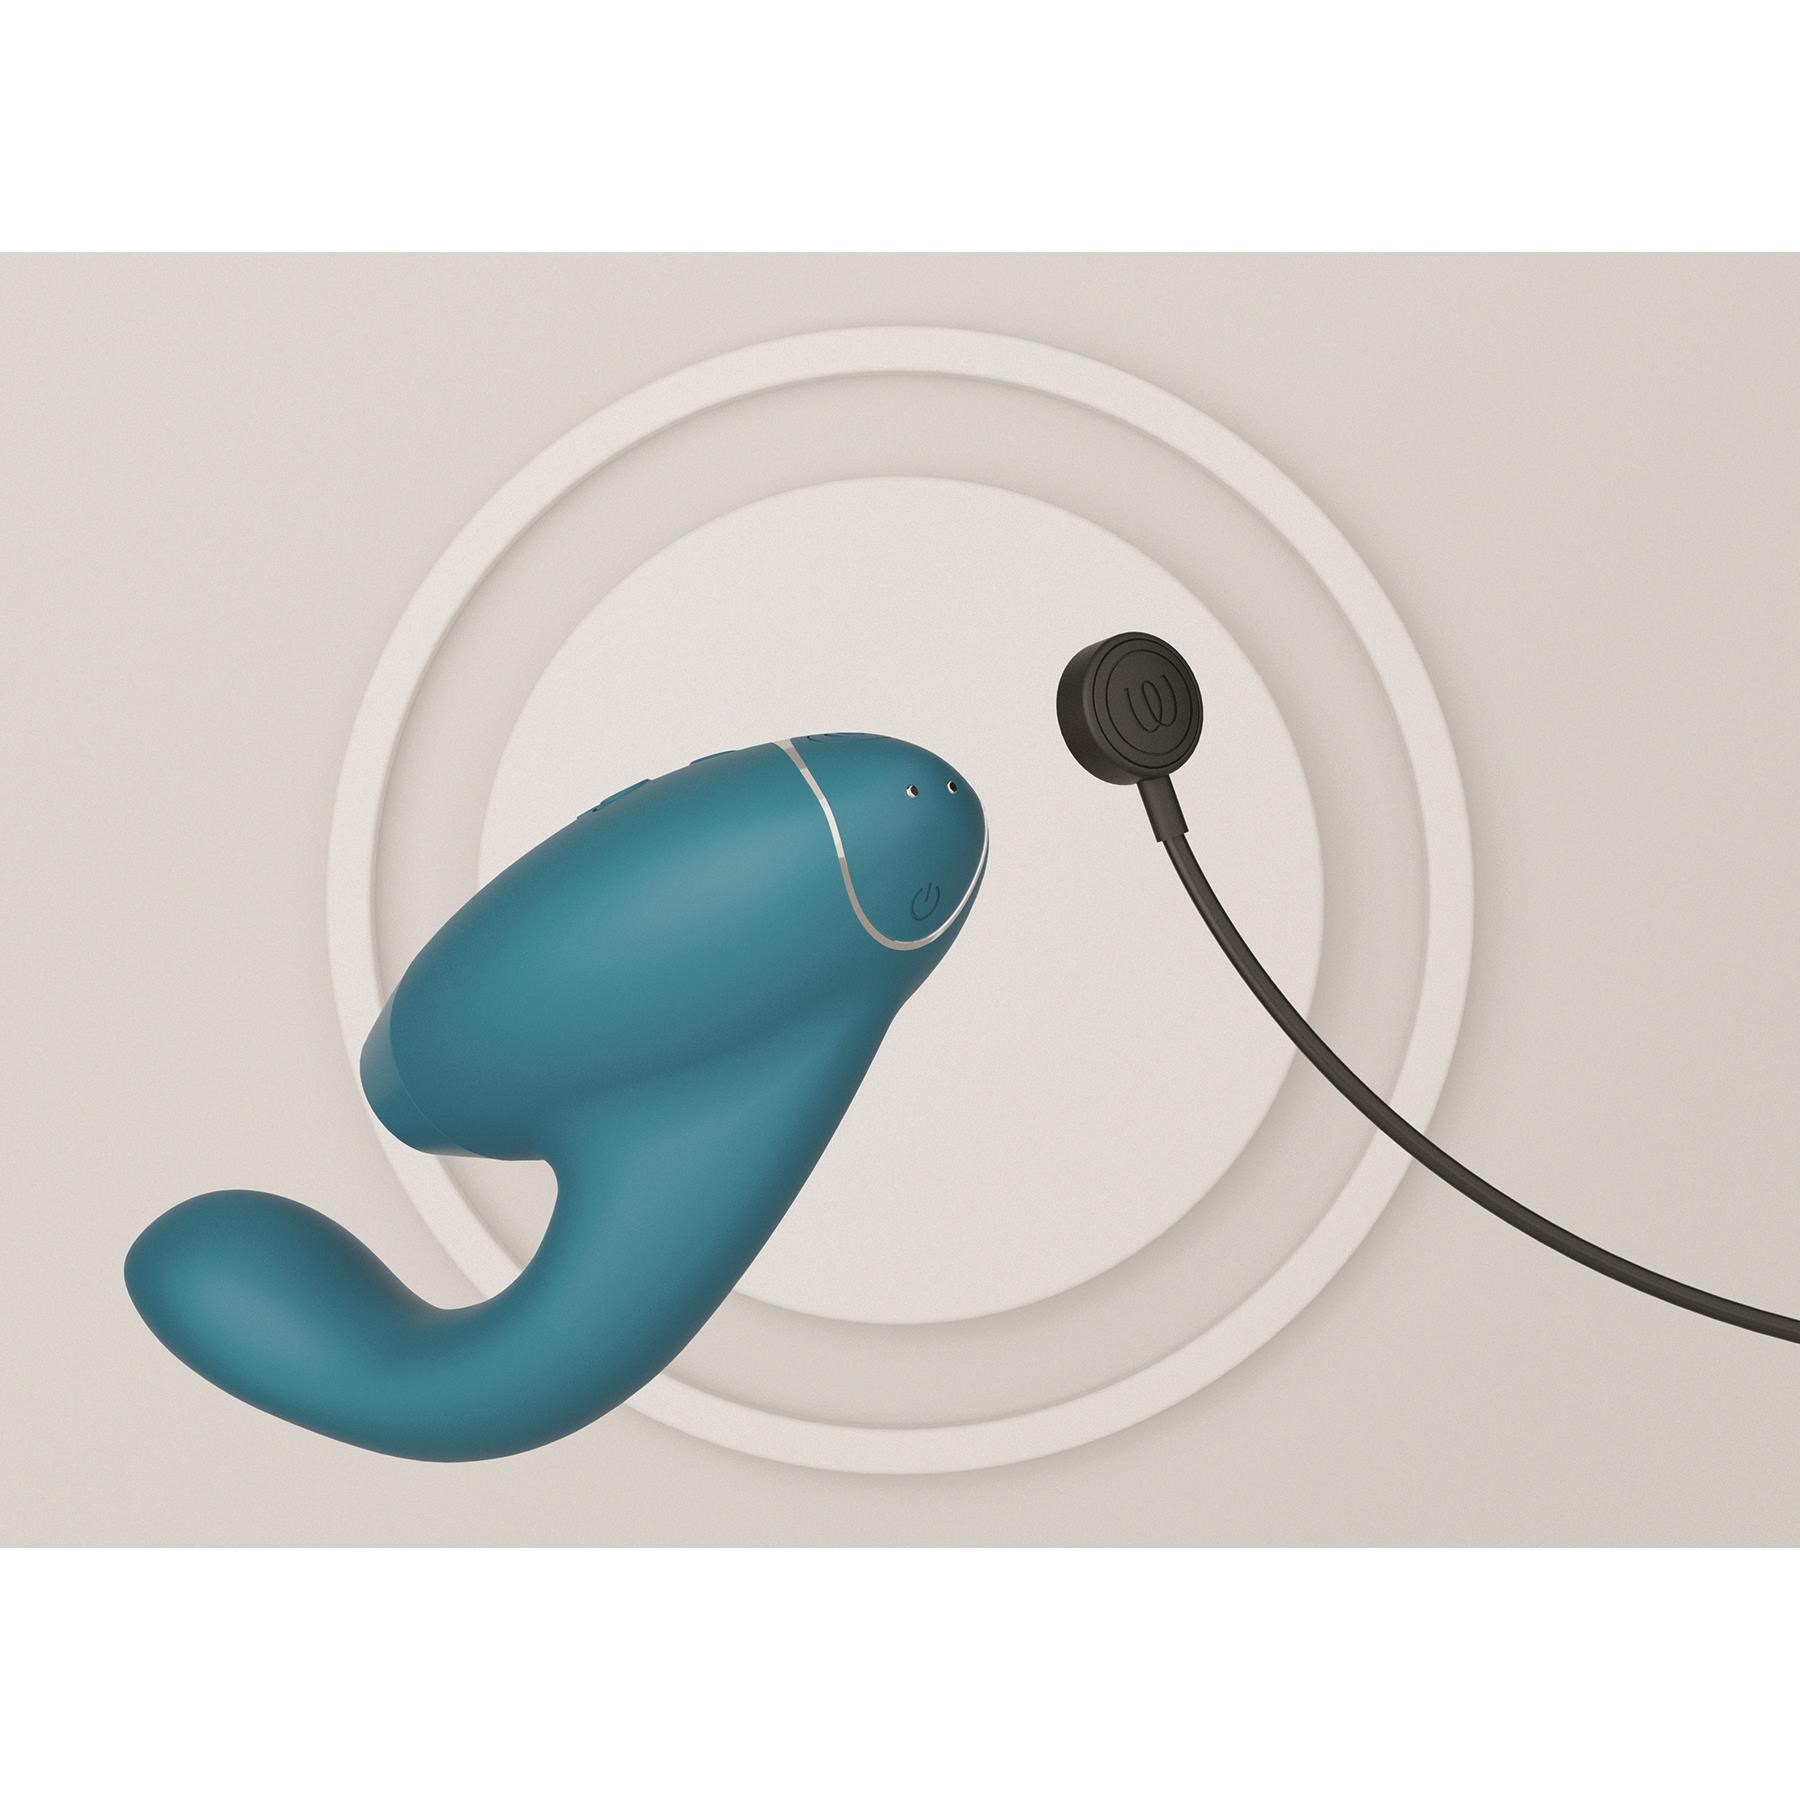 Womanizer Duo 2 Dual Stimulator - Showing Where Charging Cable is Placed